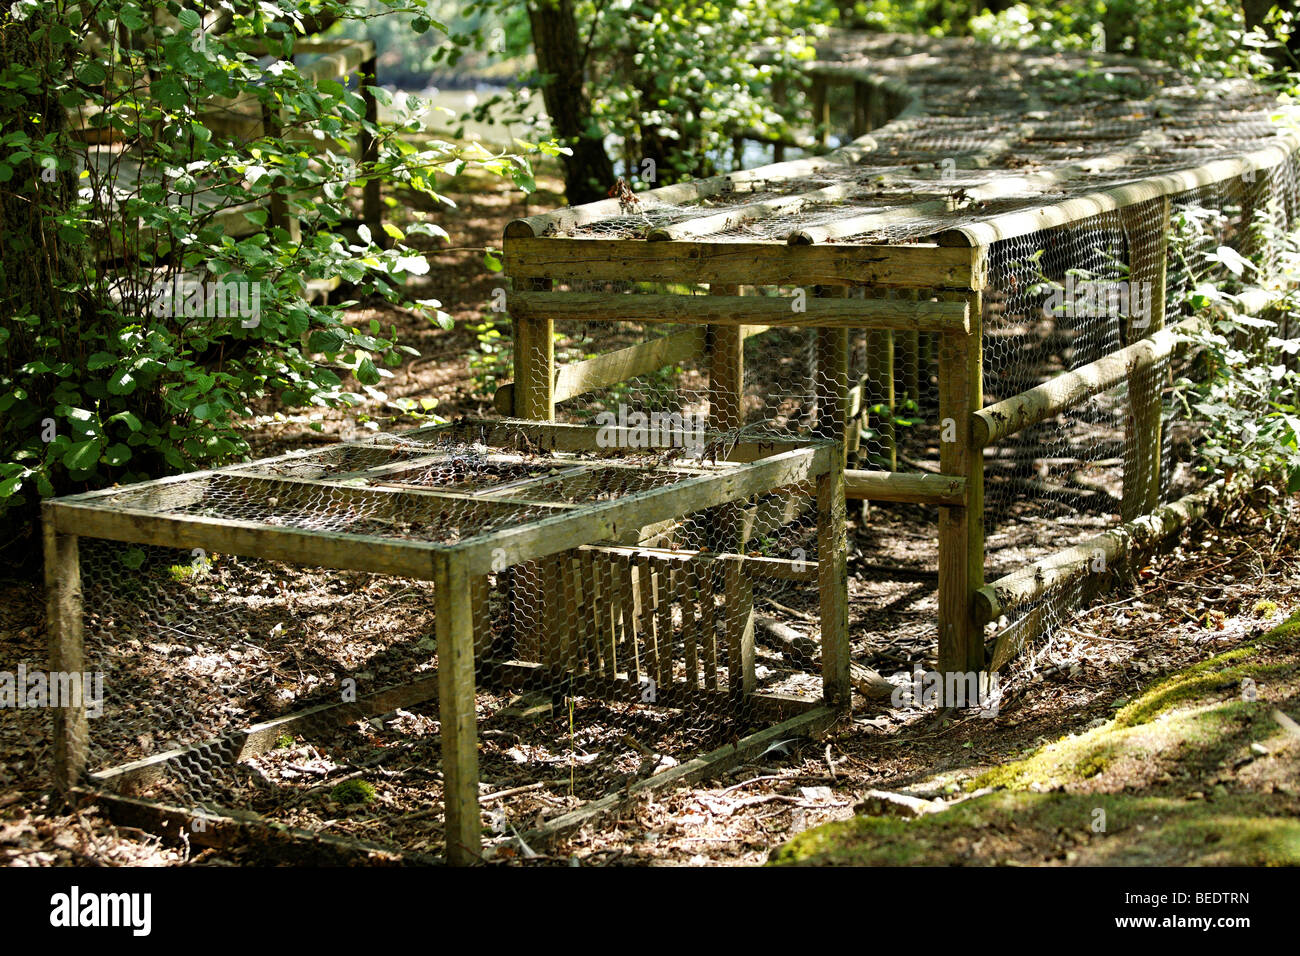 Trap for catching water birds Stock Photo